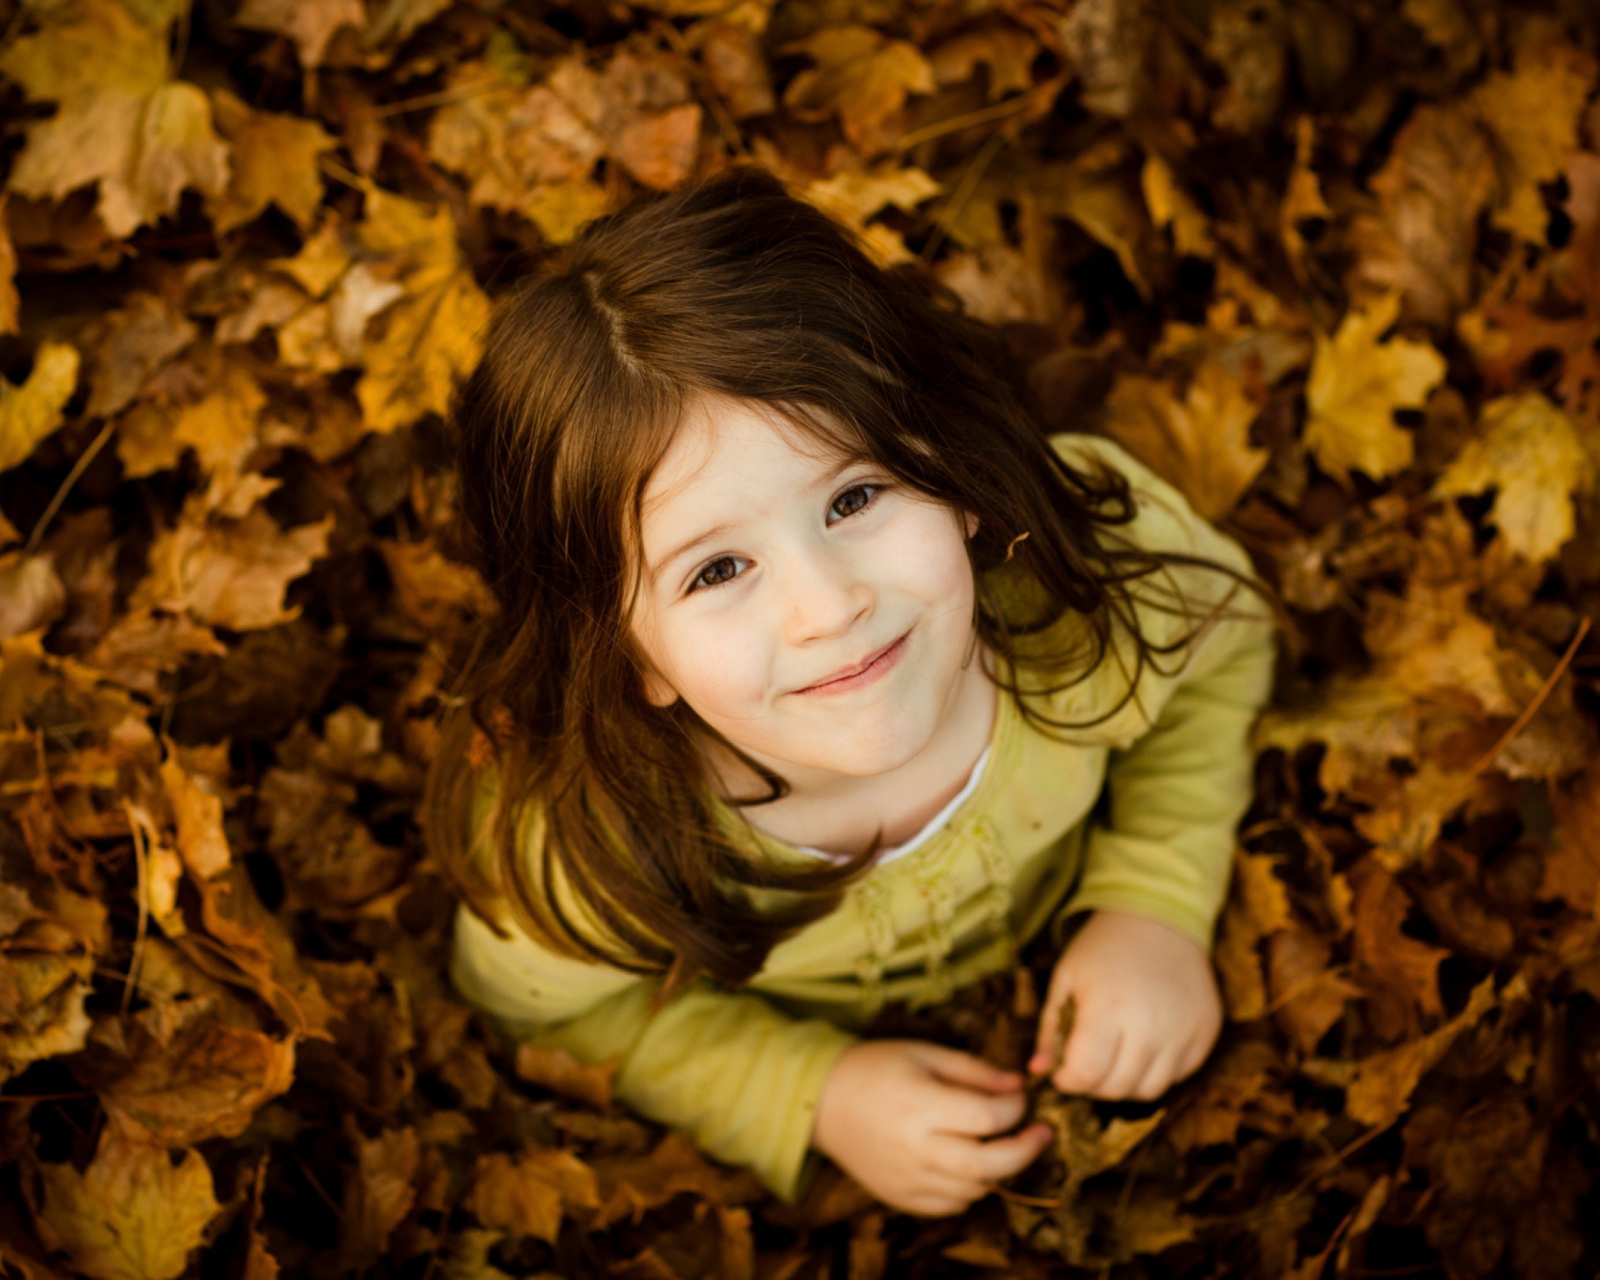 Child In Leaves wallpaper 1600x1280